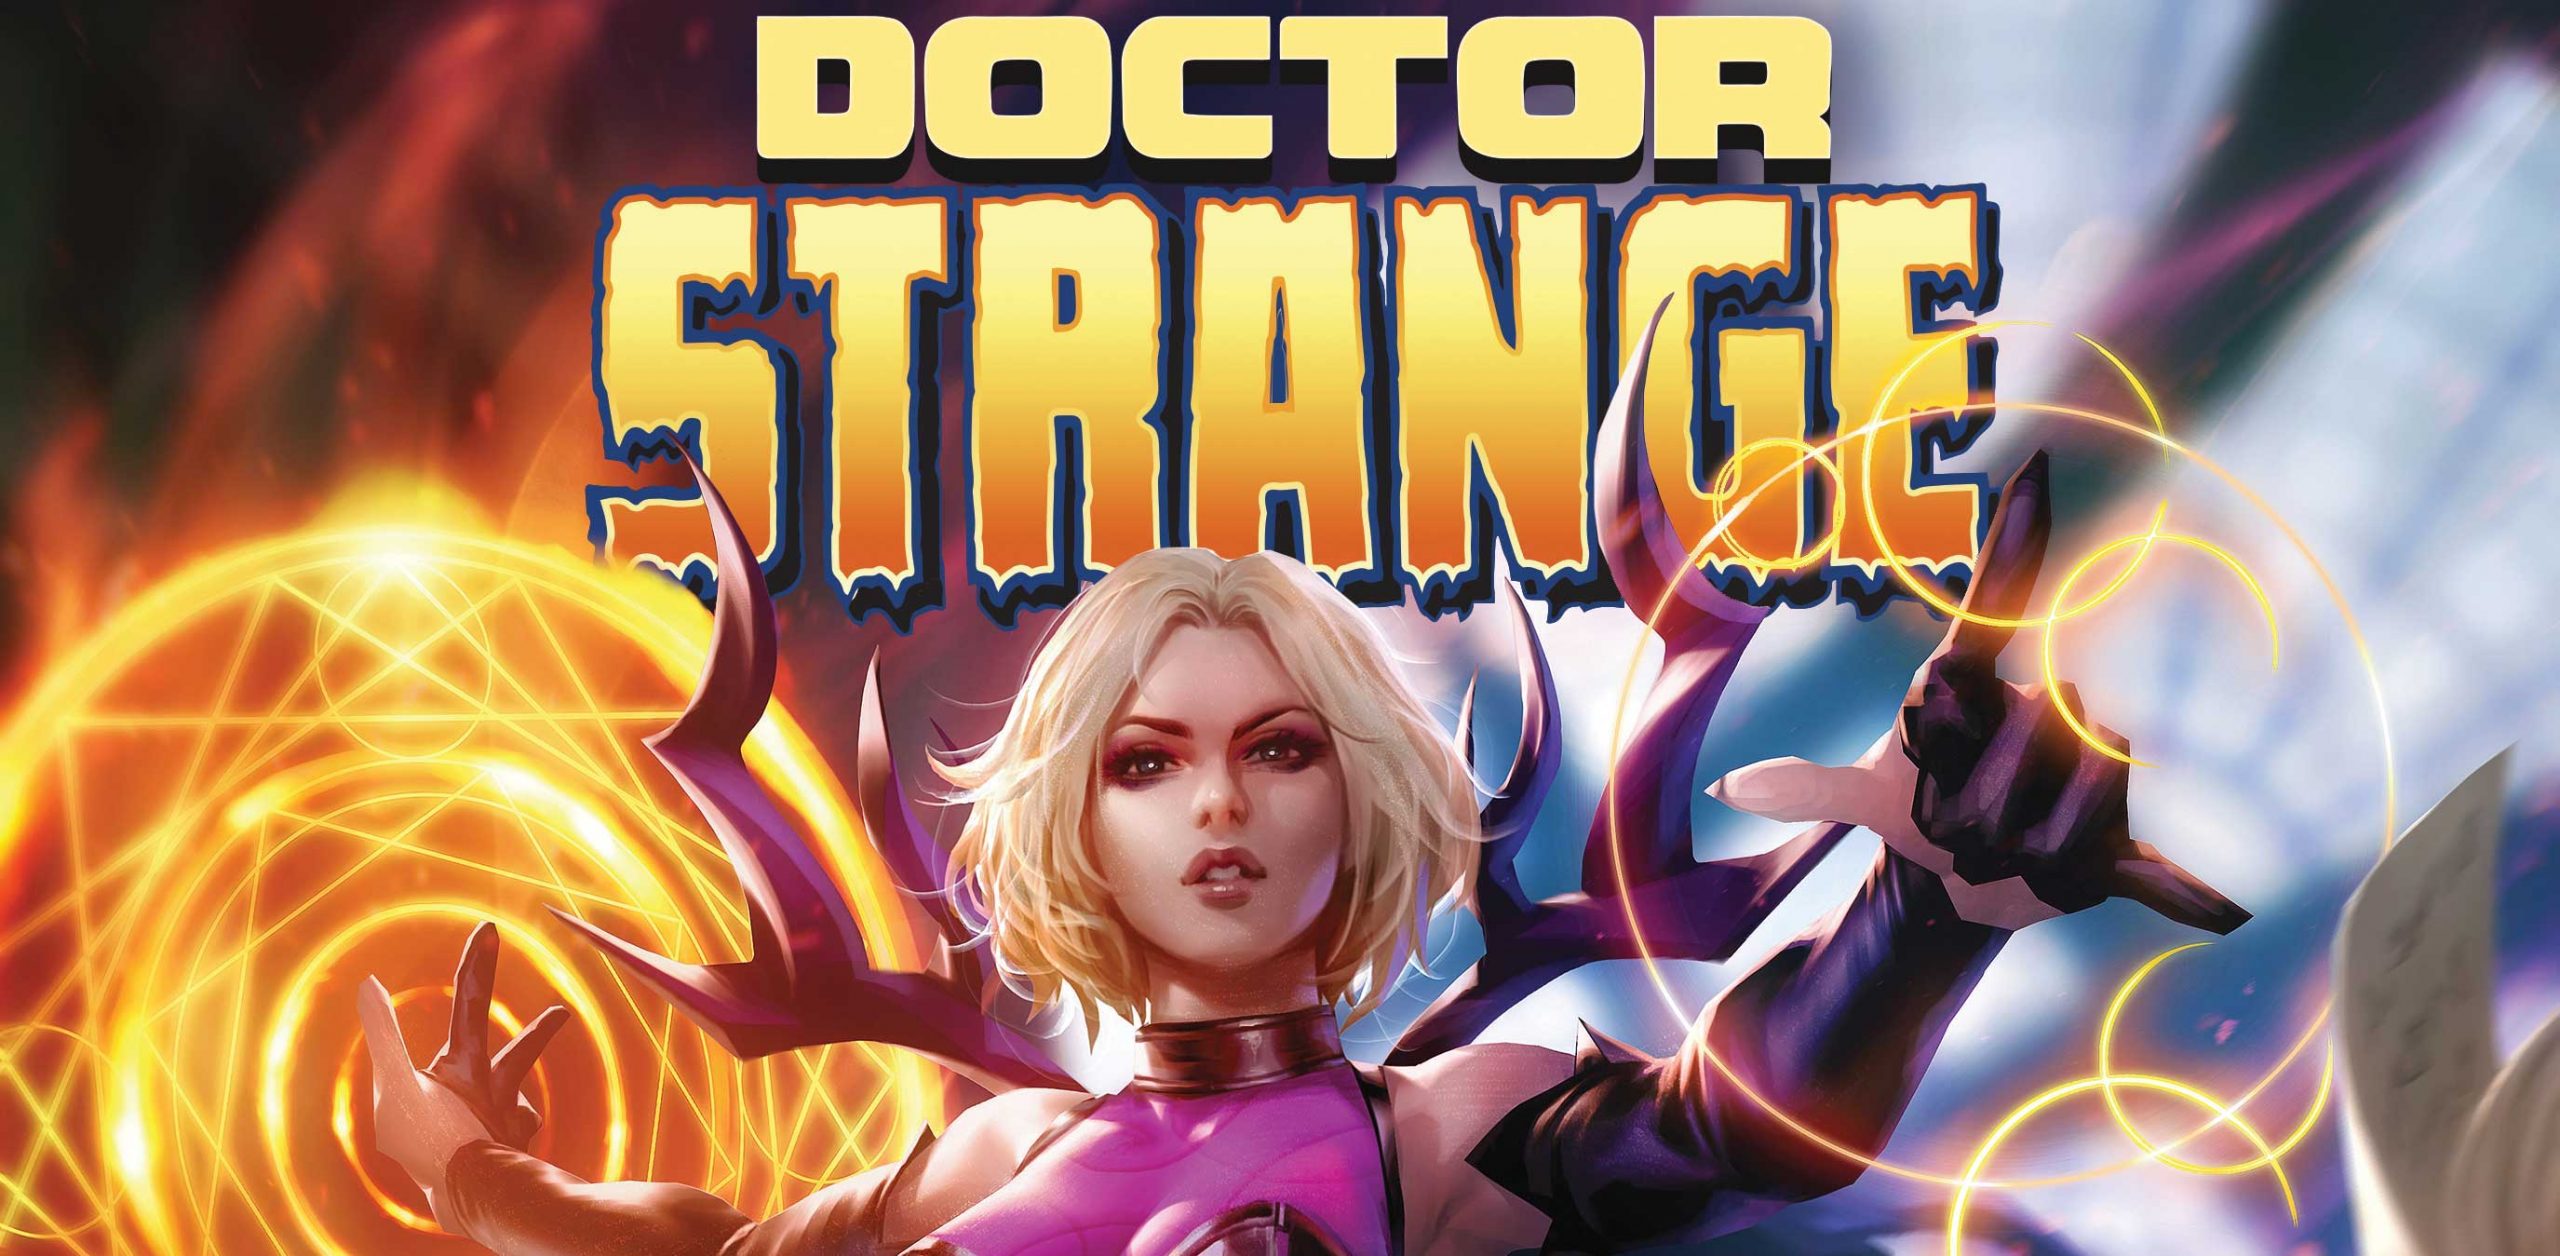 Derrick Chew does it again with amazing 'Doctor Strange' #4 cover